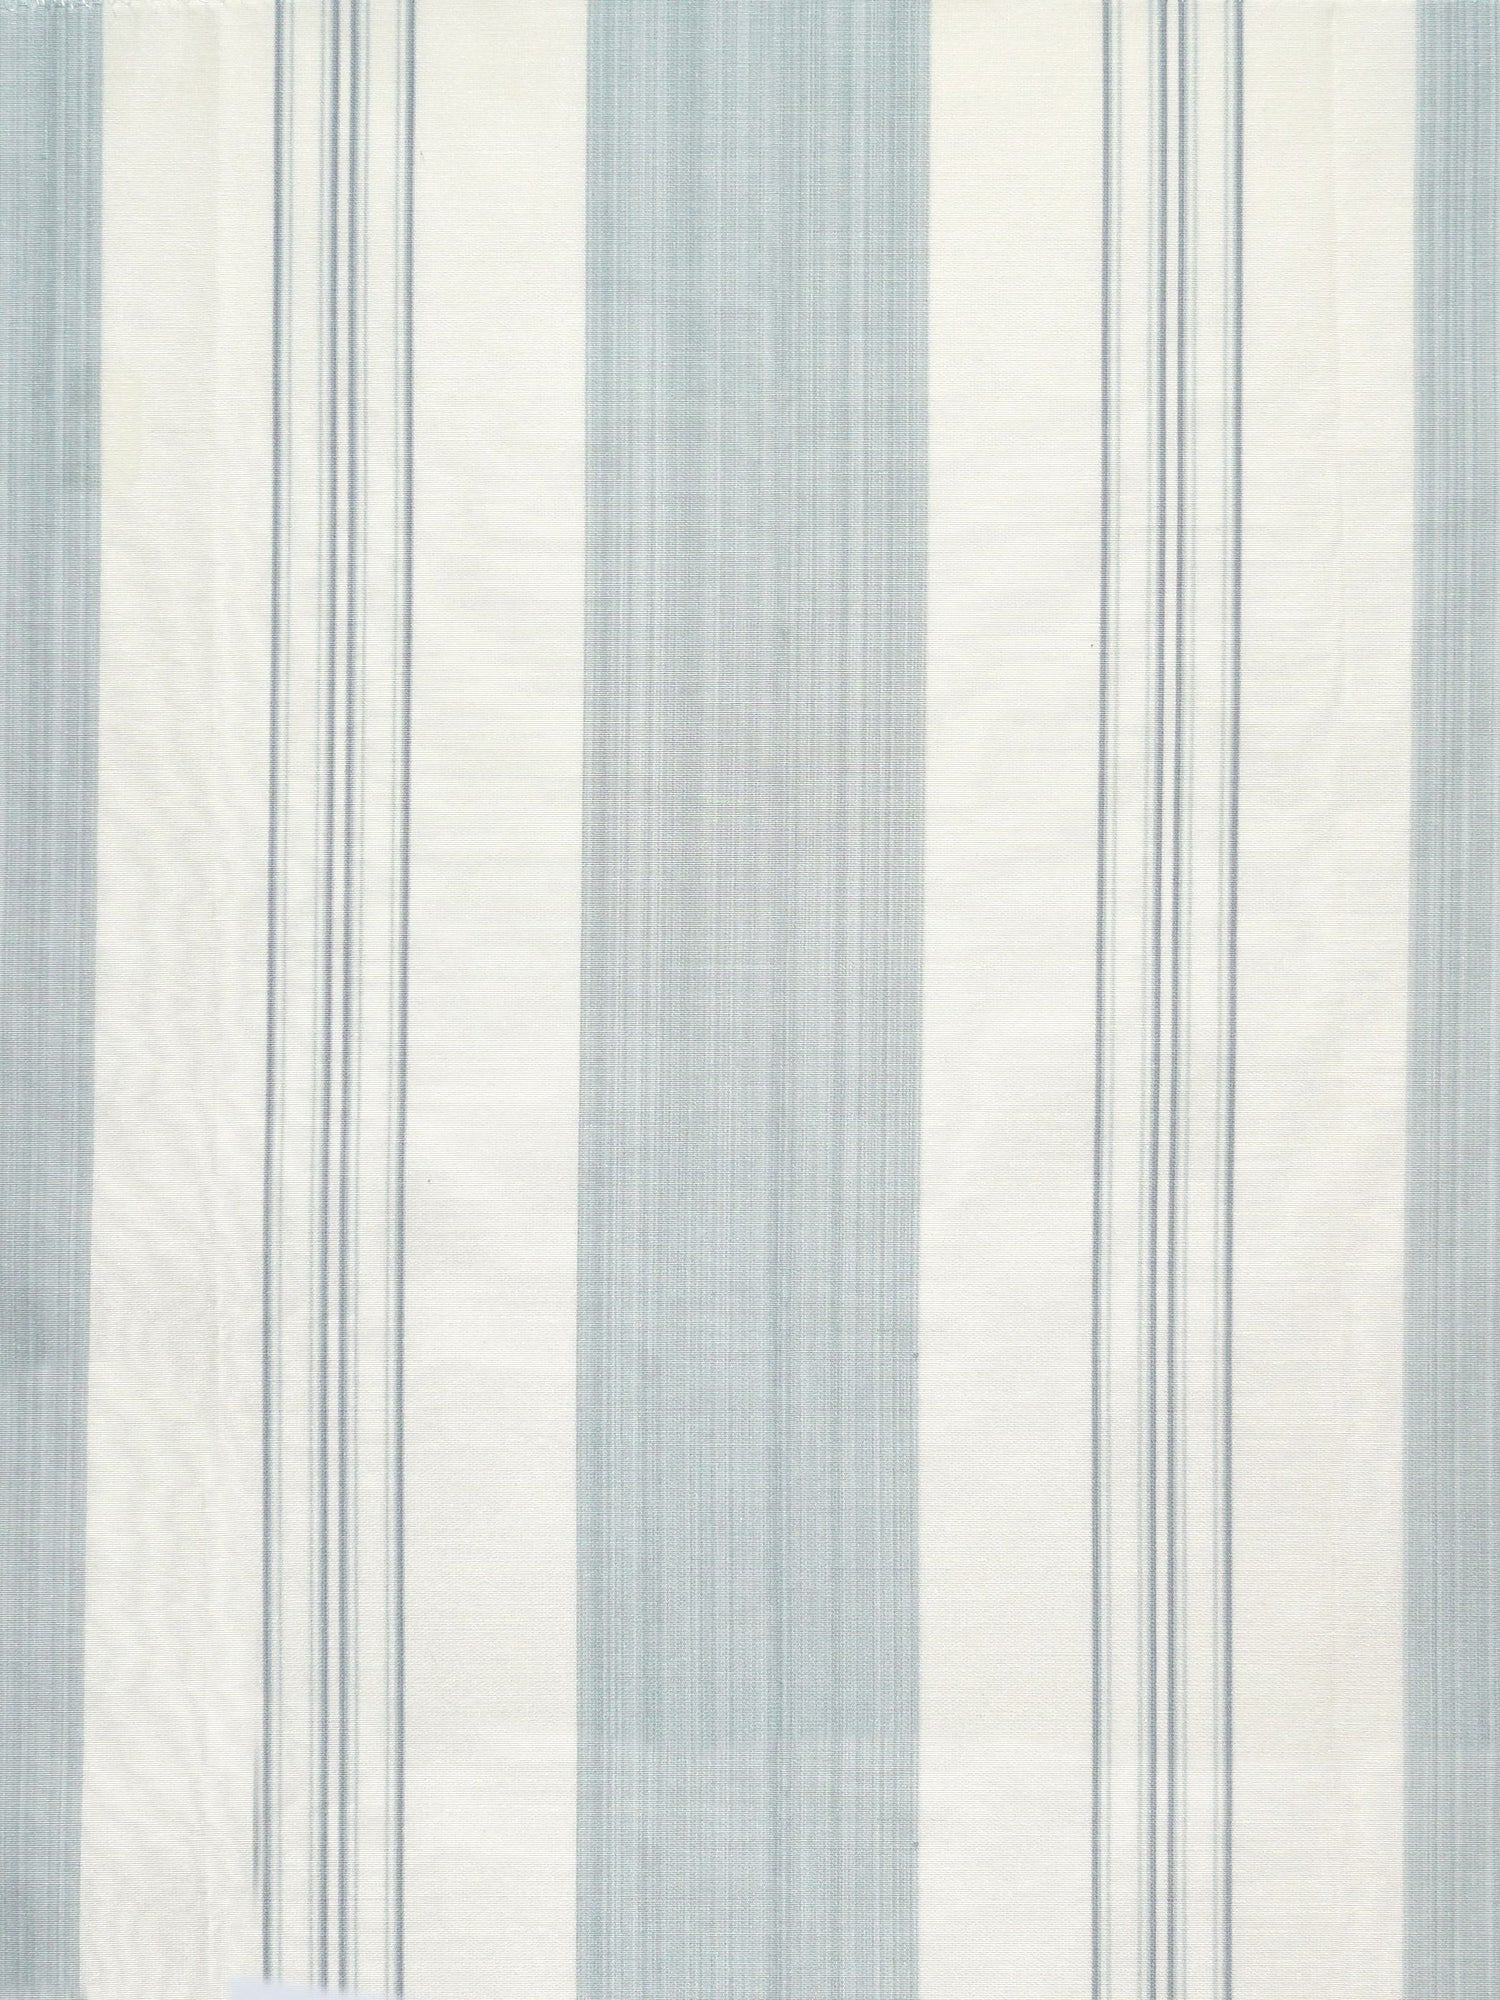 Astor Stripe fabric in sky color - pattern number SC 000126982 - by Scalamandre in the Scalamandre Fabrics Book 1 collection